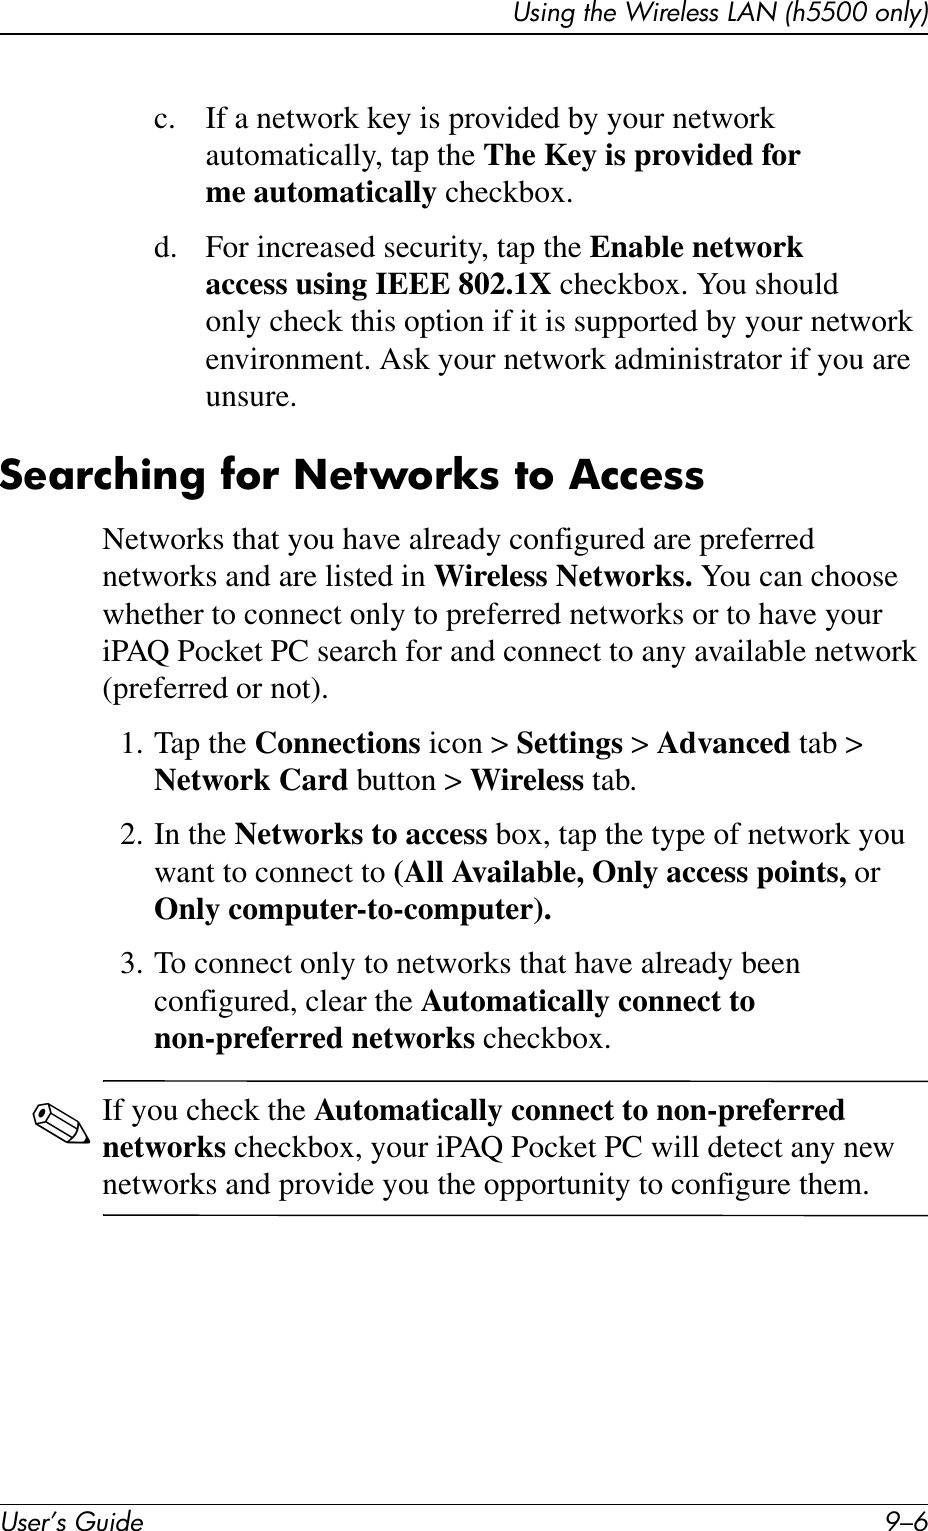 User’s Guide 9–6Using the Wireless LAN (h5500 only)c. If a network key is provided by your network automatically, tap the The Key is provided for me automatically checkbox.d. For increased security, tap the Enable network access using IEEE 802.1X checkbox. You should only check this option if it is supported by your network environment. Ask your network administrator if you are unsure.Searching for Networks to AccessNetworks that you have already configured are preferred networks and are listed in Wireless Networks. You can choose whether to connect only to preferred networks or to have your iPAQ Pocket PC search for and connect to any available network (preferred or not).1. Tap the Connections icon &gt; Settings &gt; Advanced tab &gt; Network Card button &gt; Wireless tab.2. In the Networks to access box, tap the type of network you want to connect to (All Available, Only access points, or Only computer-to-computer).3. To connect only to networks that have already been configured, clear the Automatically connect to non-preferred networks checkbox.✎If you check the Automatically connect to non-preferred networks checkbox, your iPAQ Pocket PC will detect any new networks and provide you the opportunity to configure them.